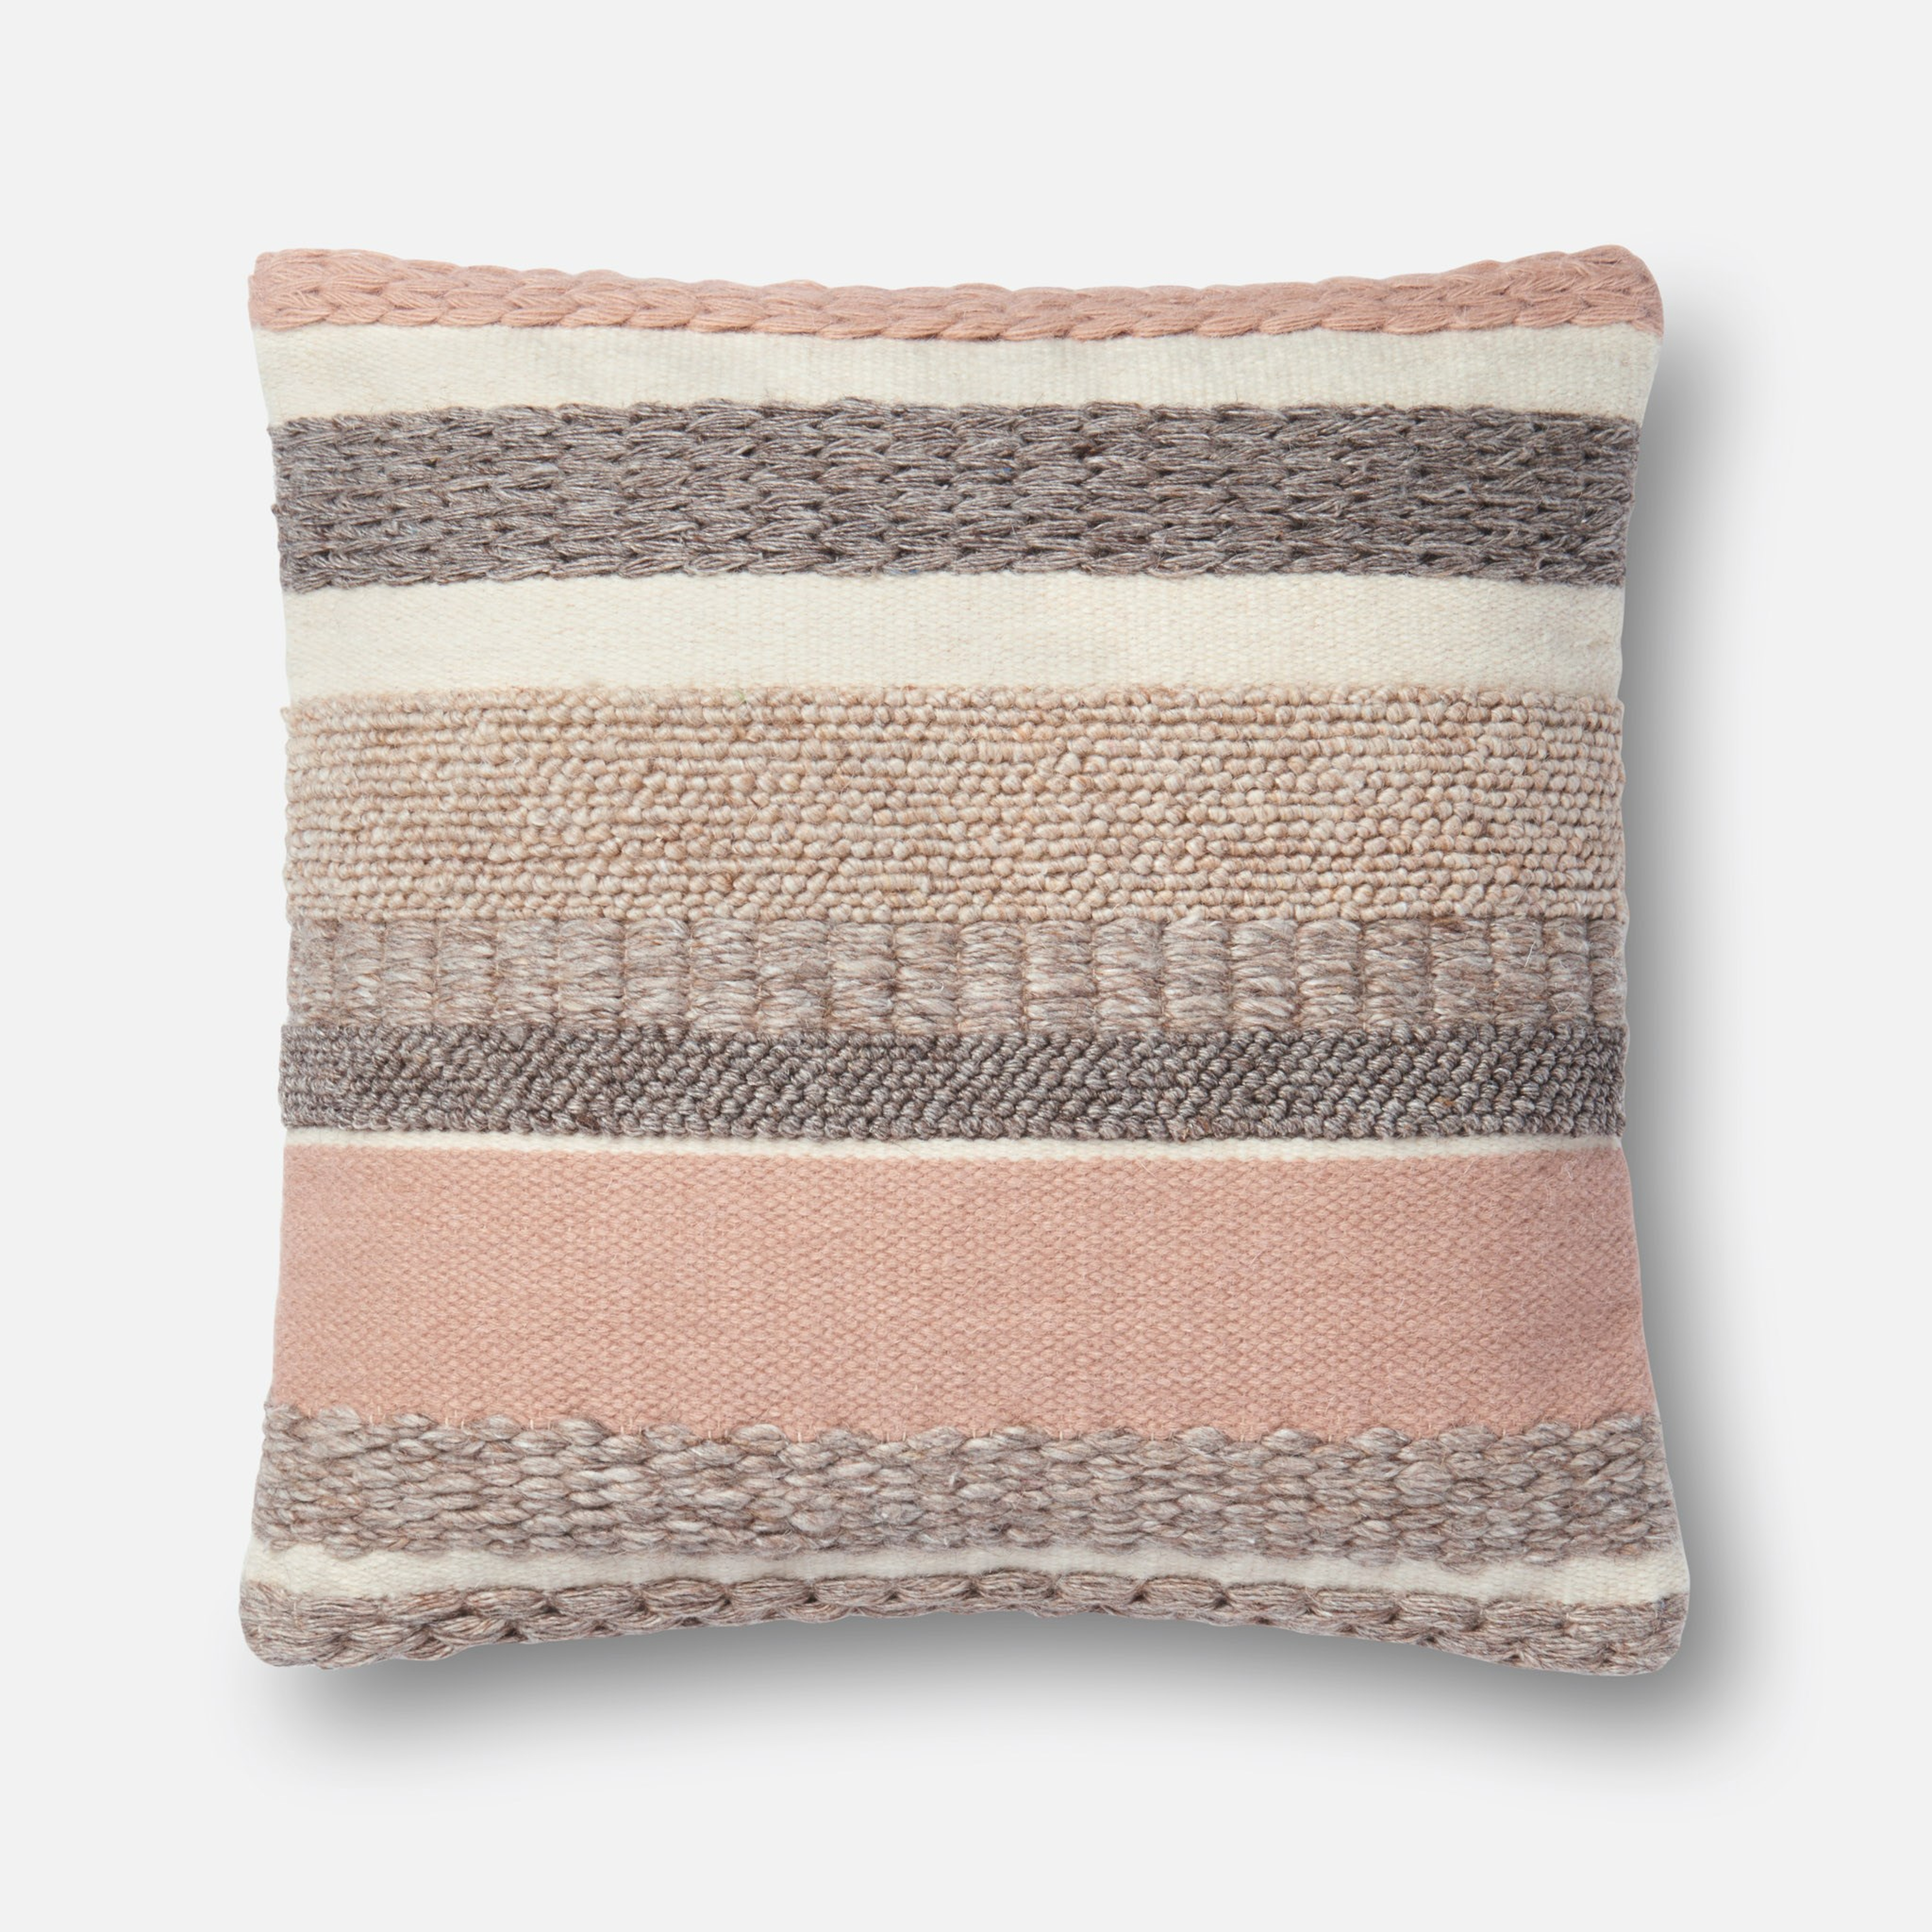 DSET Pillow BLUSH 22" X 22" Cover w/Down - Loloi Rugs